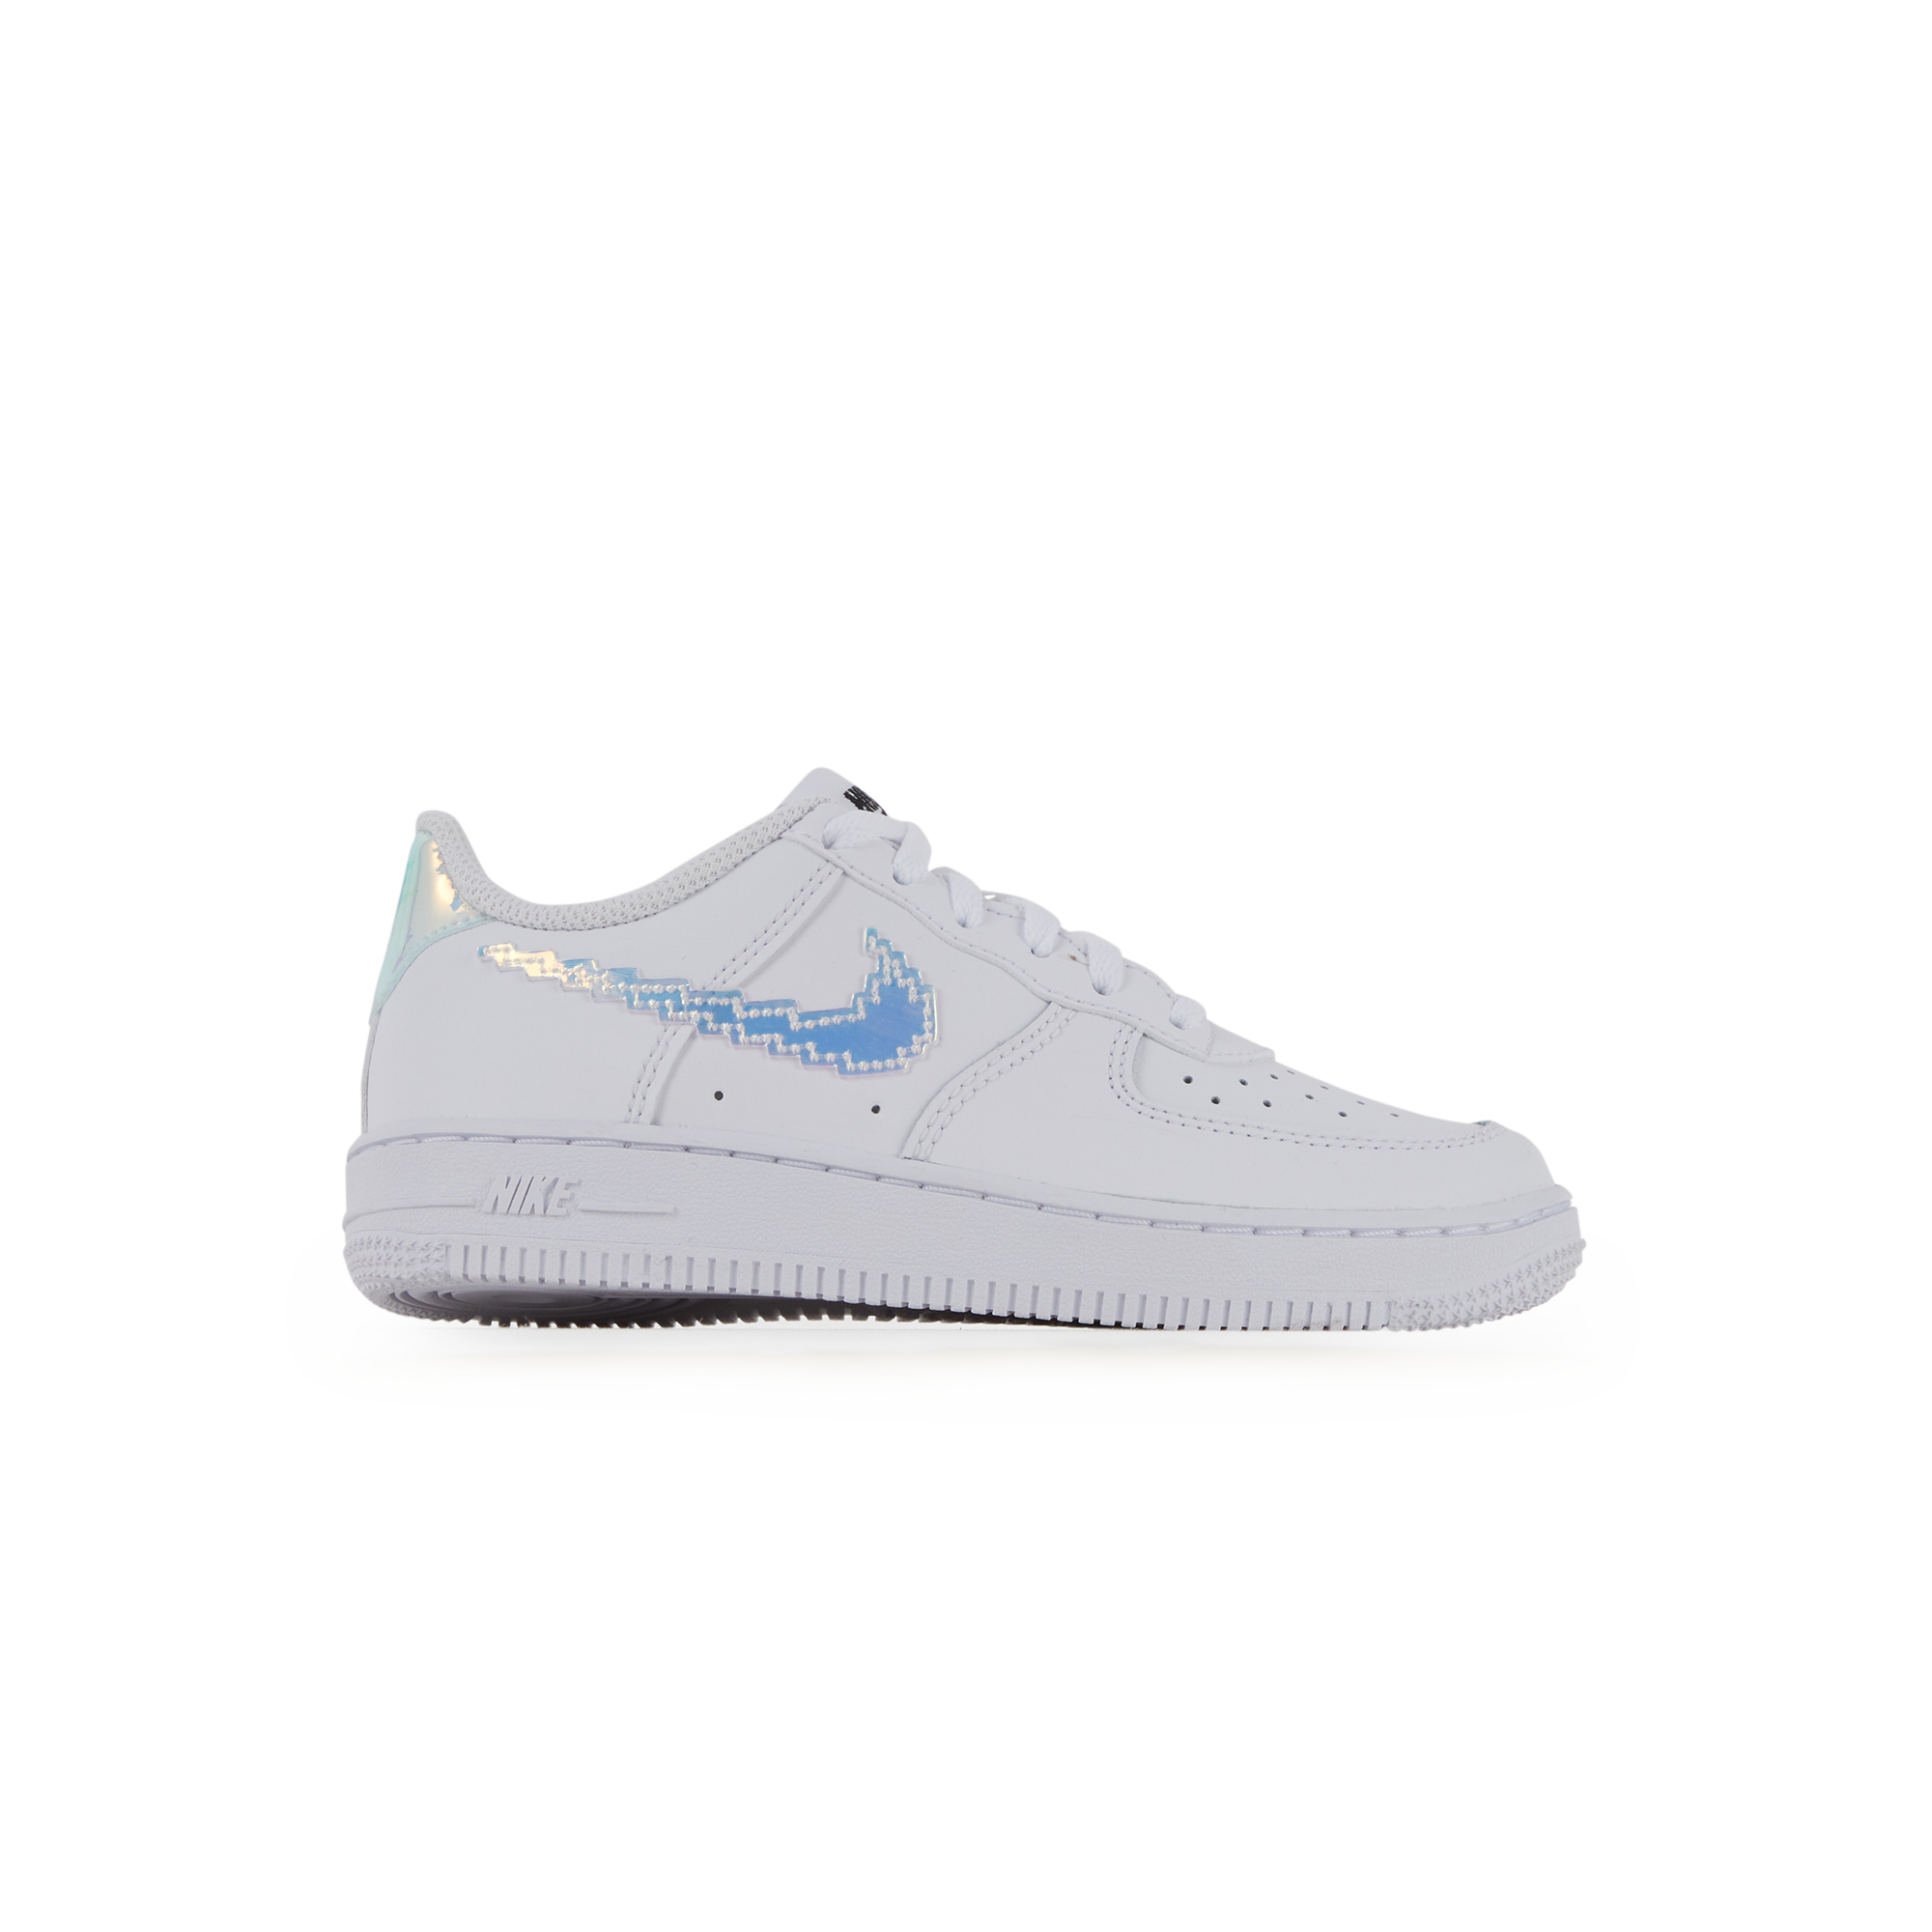 NIKE AIR FORCE 1 LOW PLUGGED IN BLANC/IRIDESCENT | Courir.com